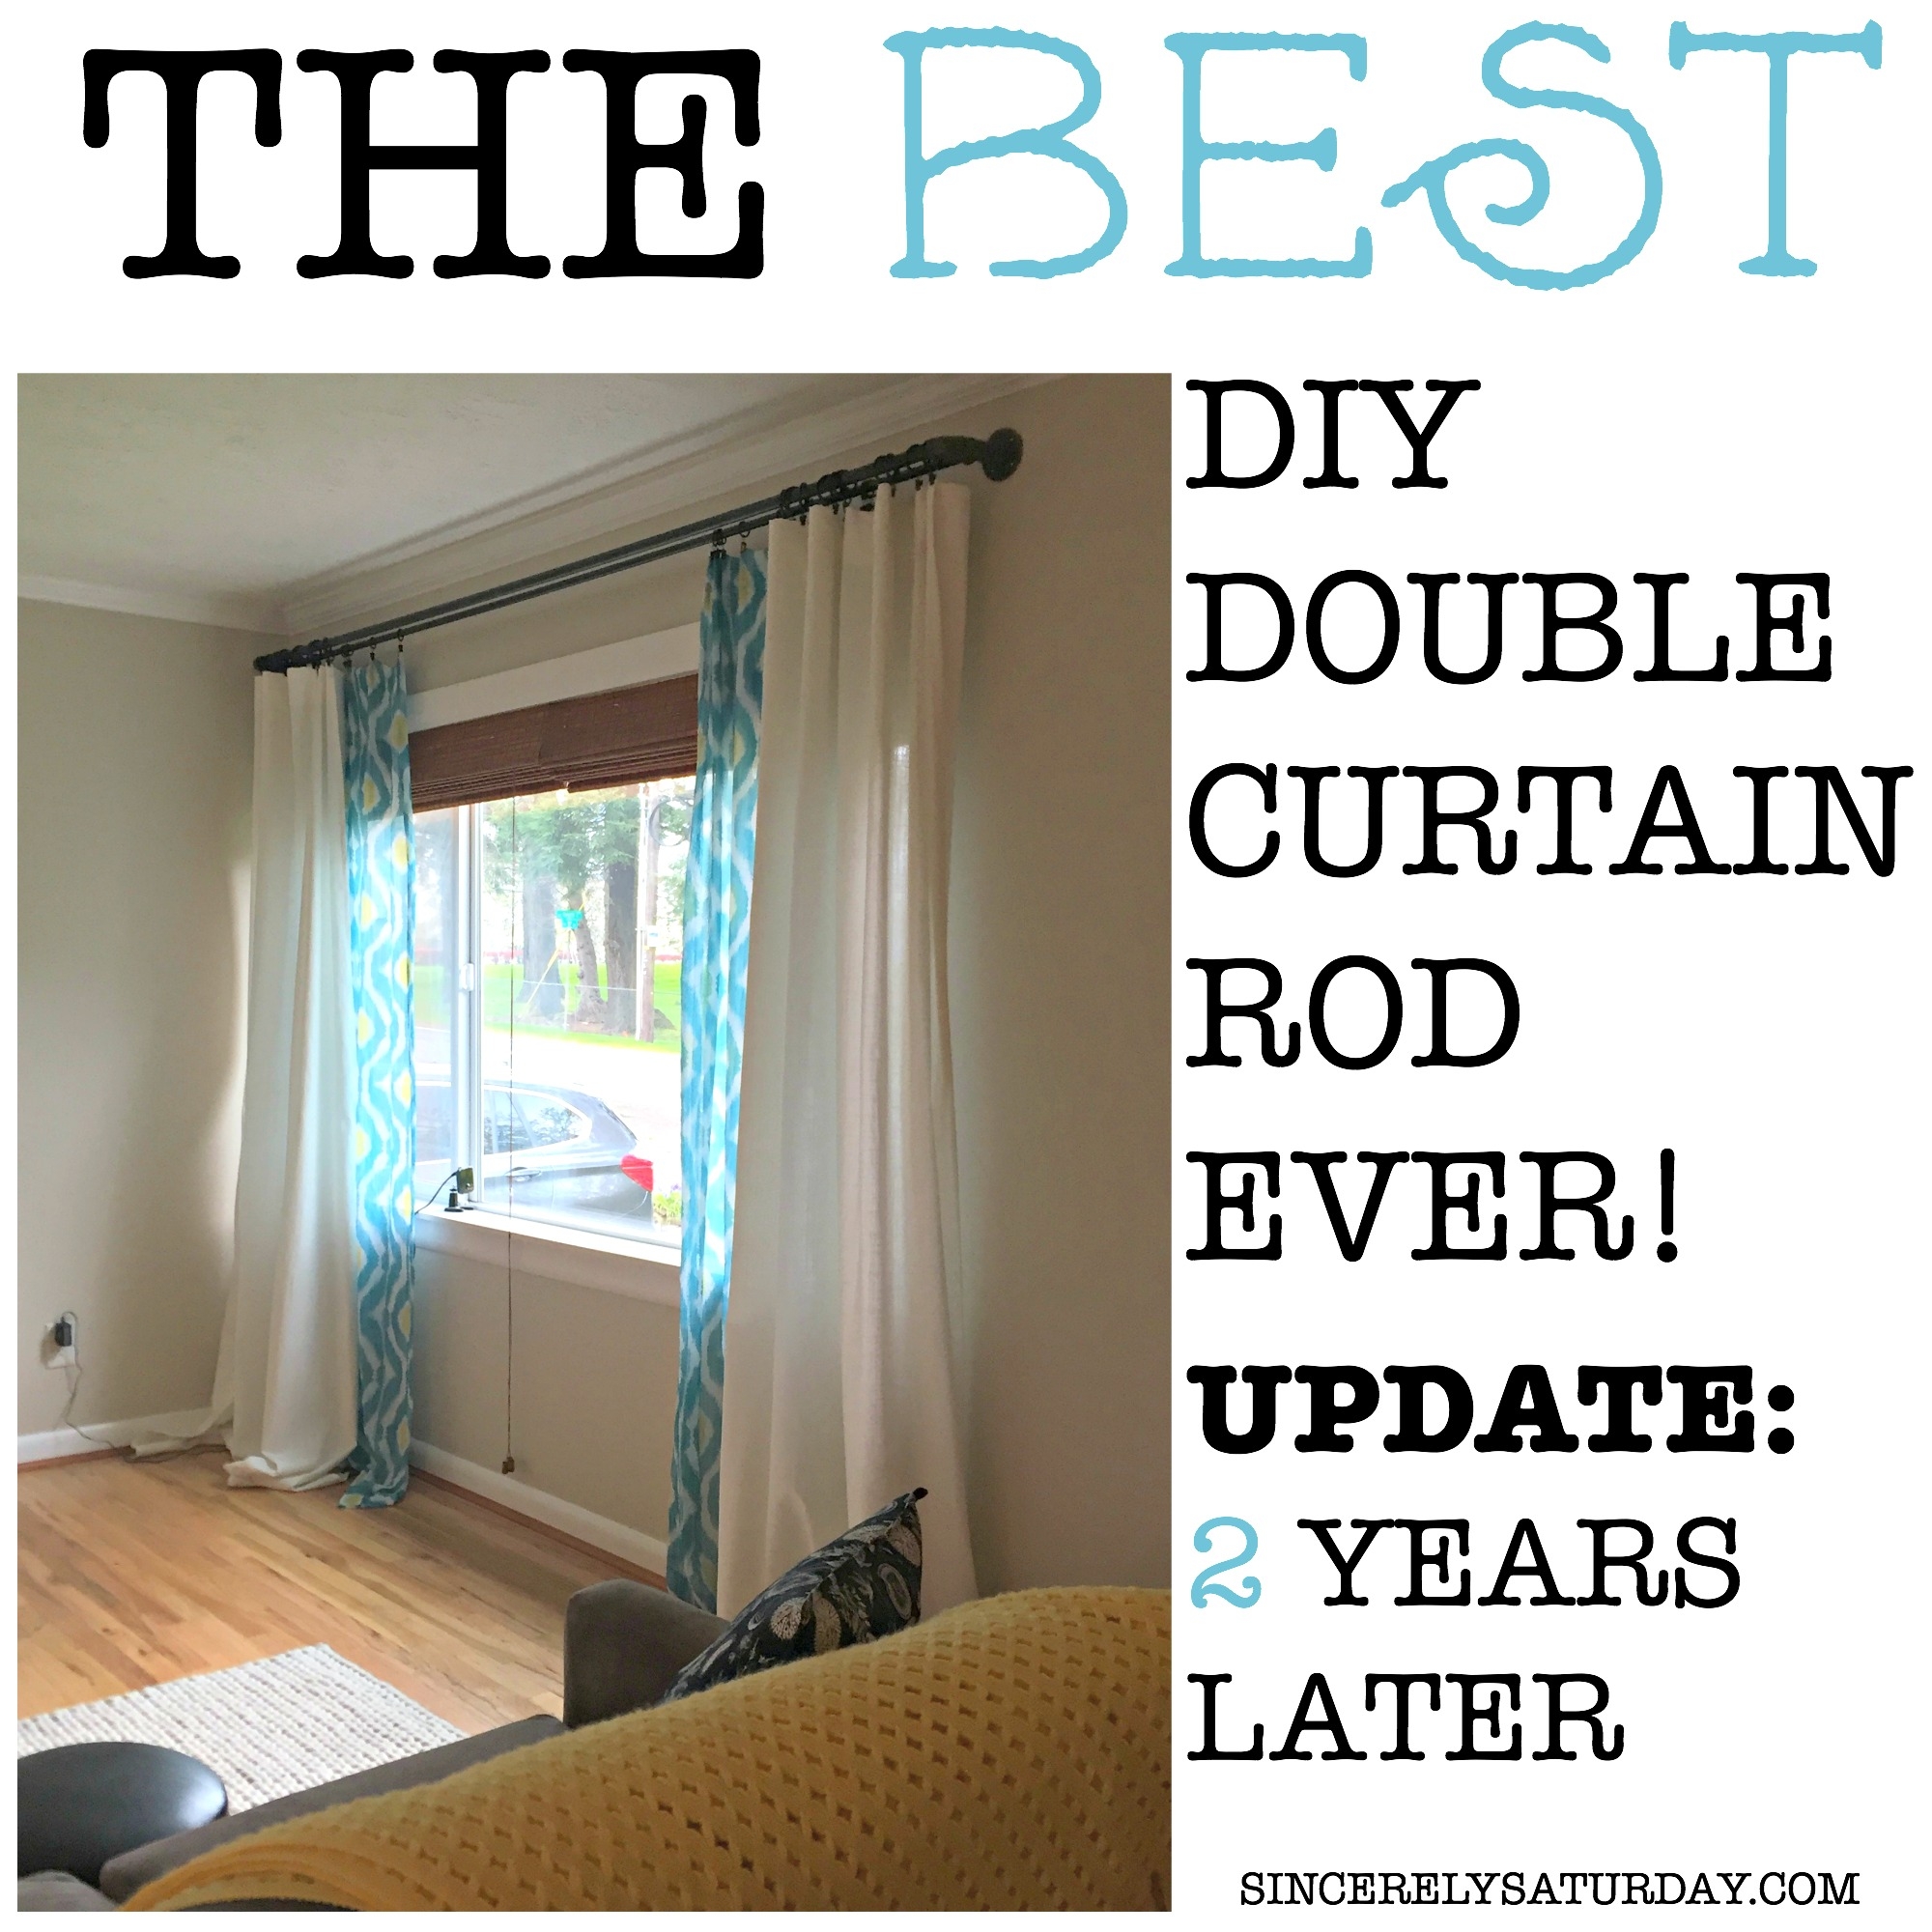 BEST DIY DOUBLE CURTAIN ROD EVER! - 2 YEARS LATER